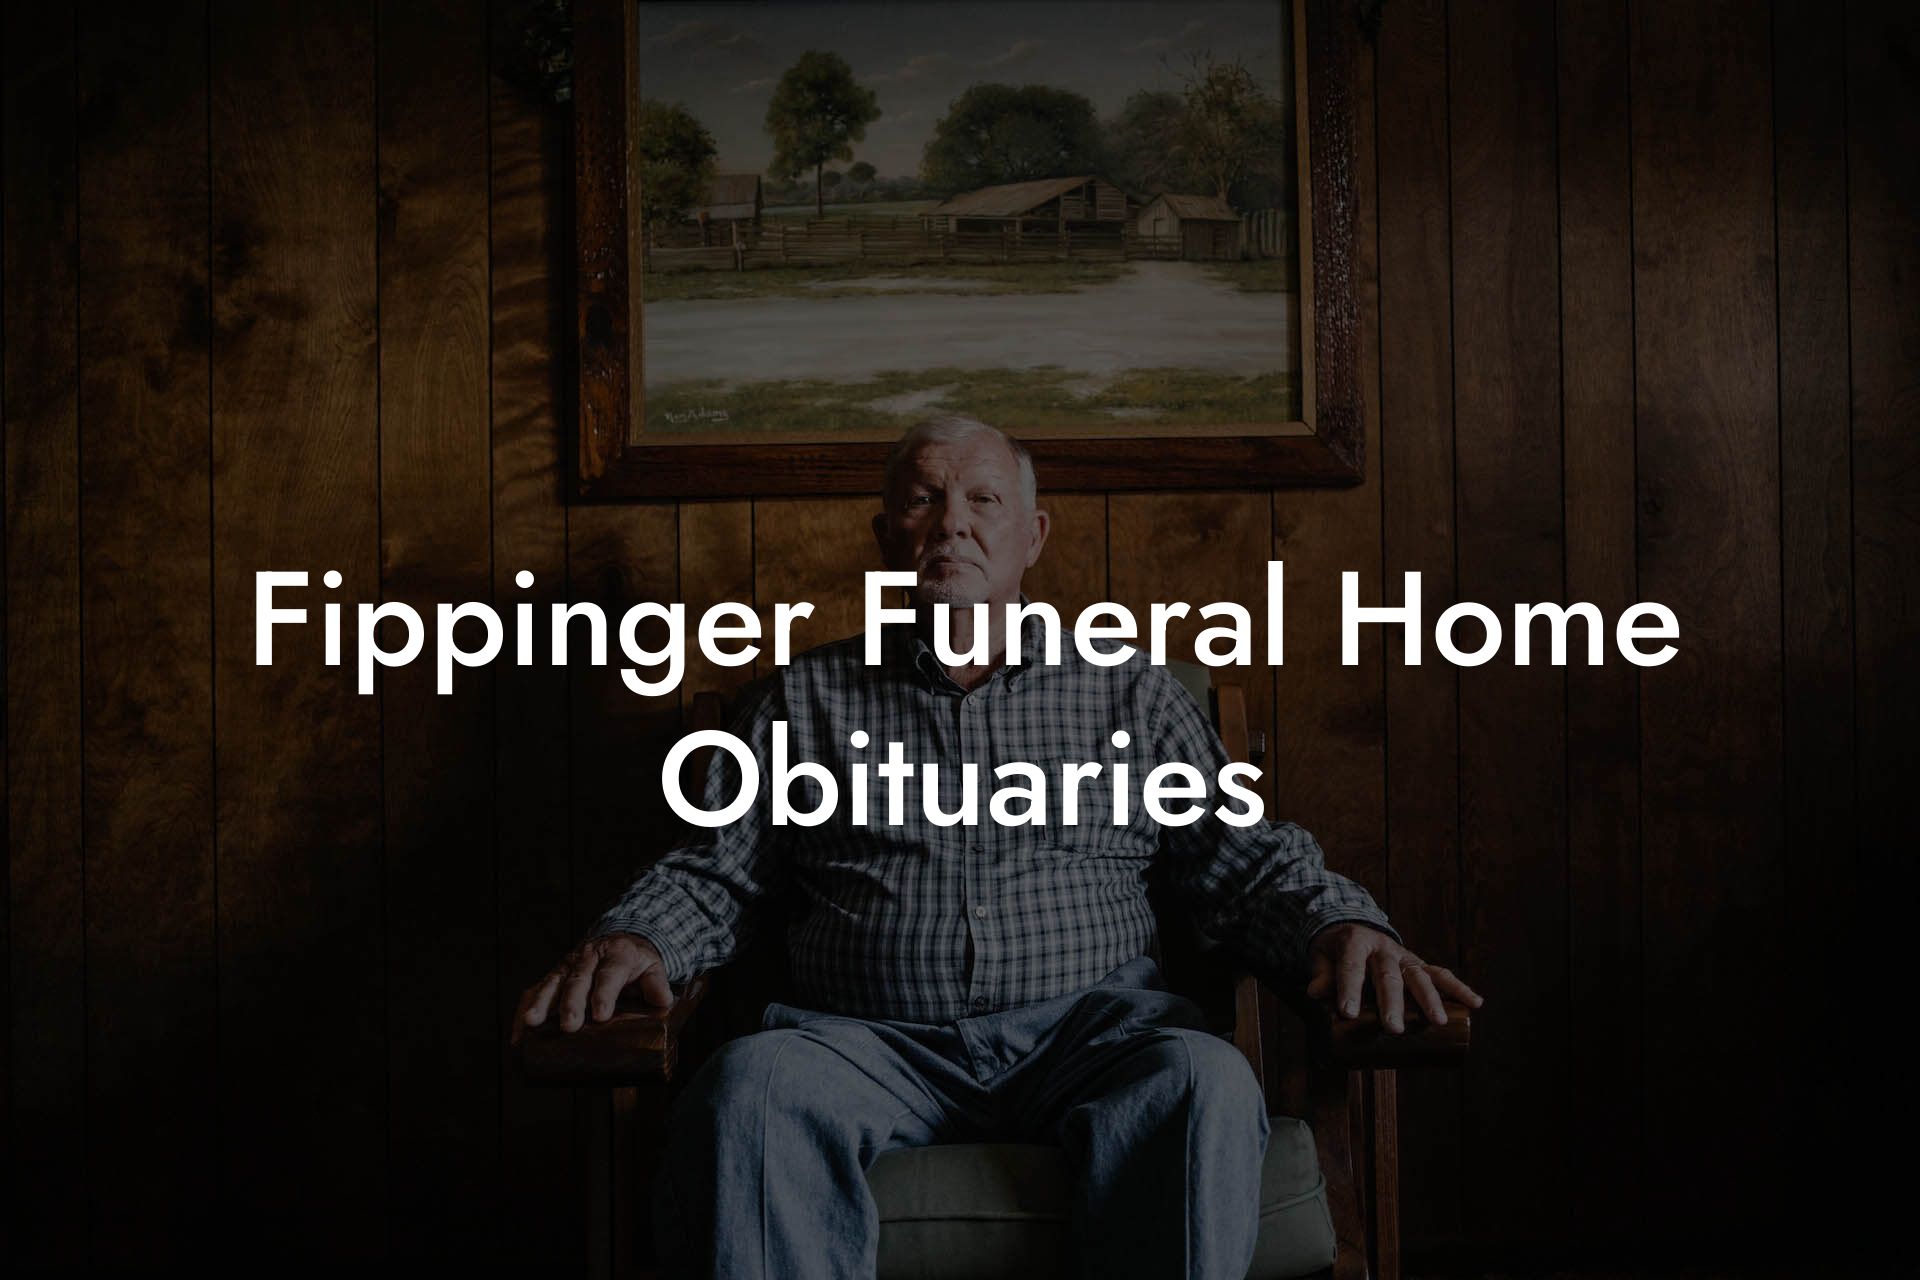 Fippinger Funeral Home Obituaries